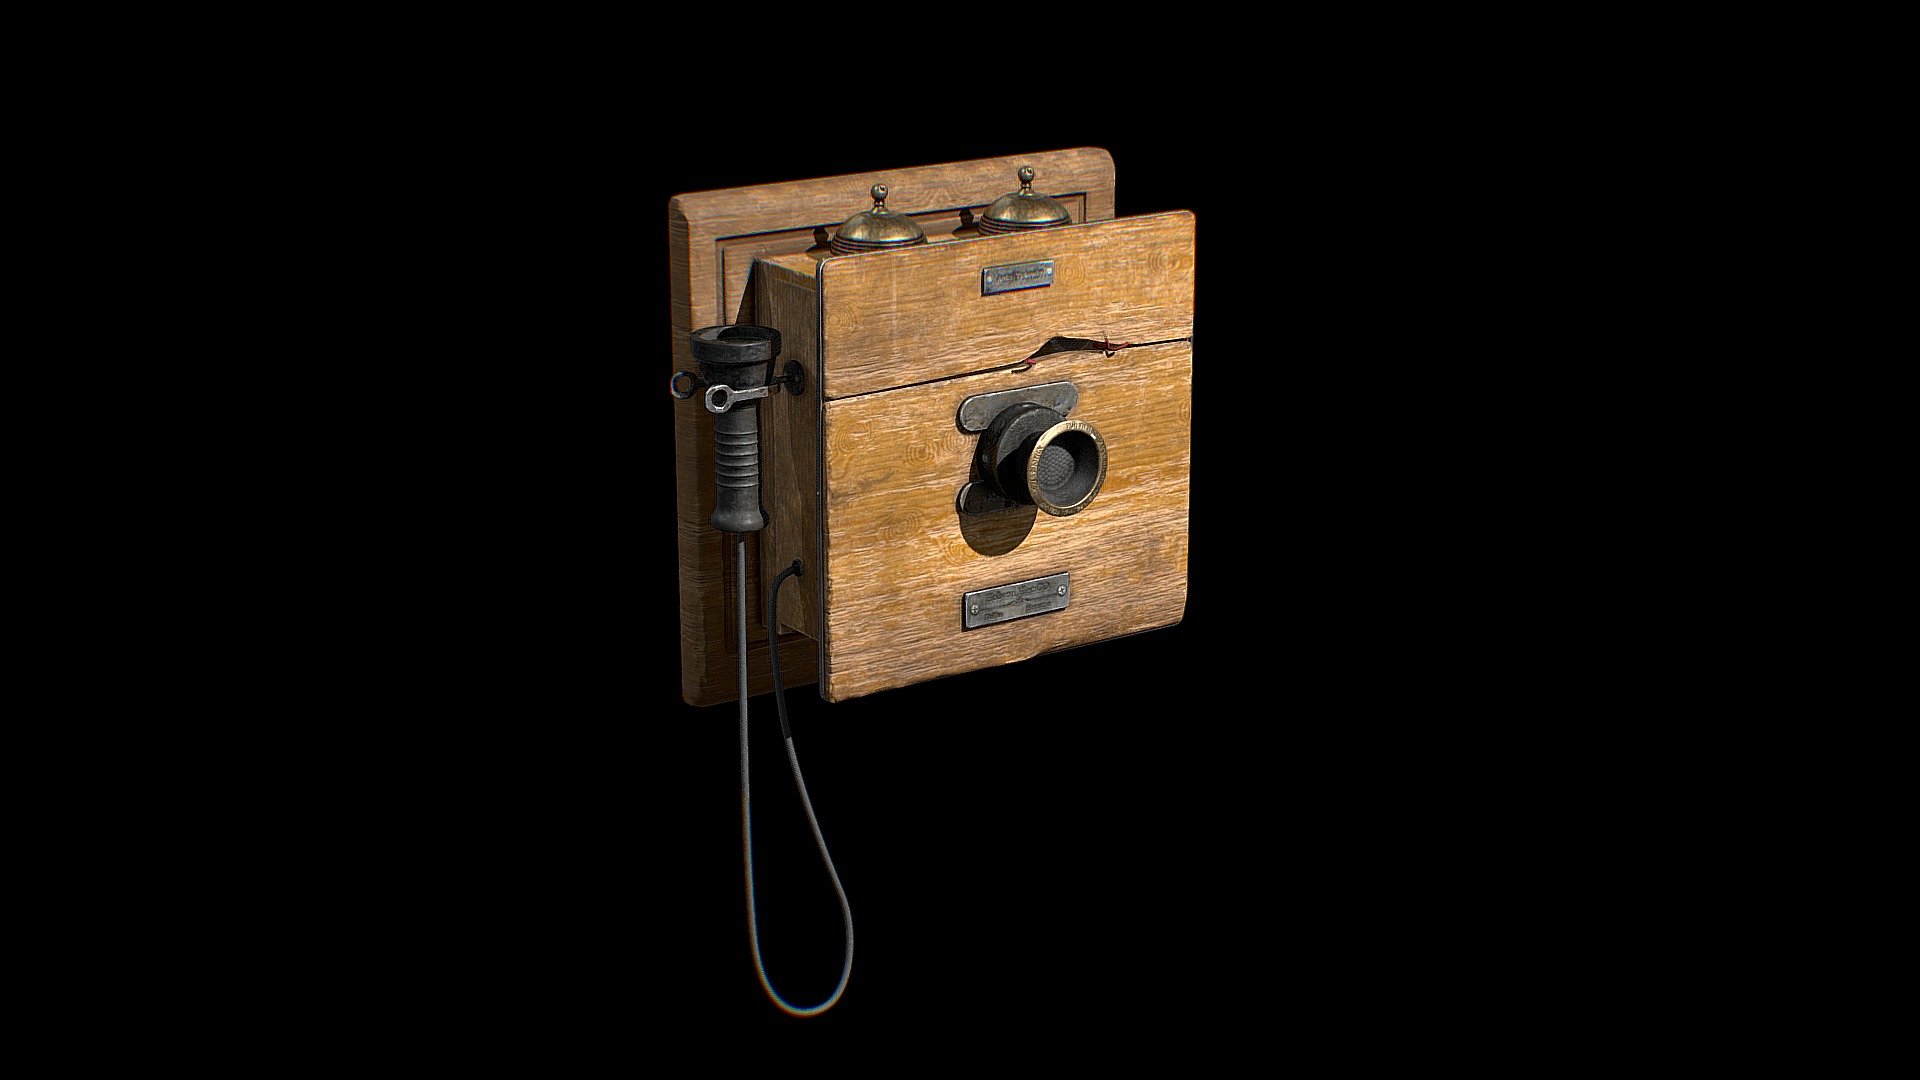 Free download：www.freepoly.org - Old Phone-Freepoly.org - Download Free 3D model by Freepoly.org (@blackrray) 3d model